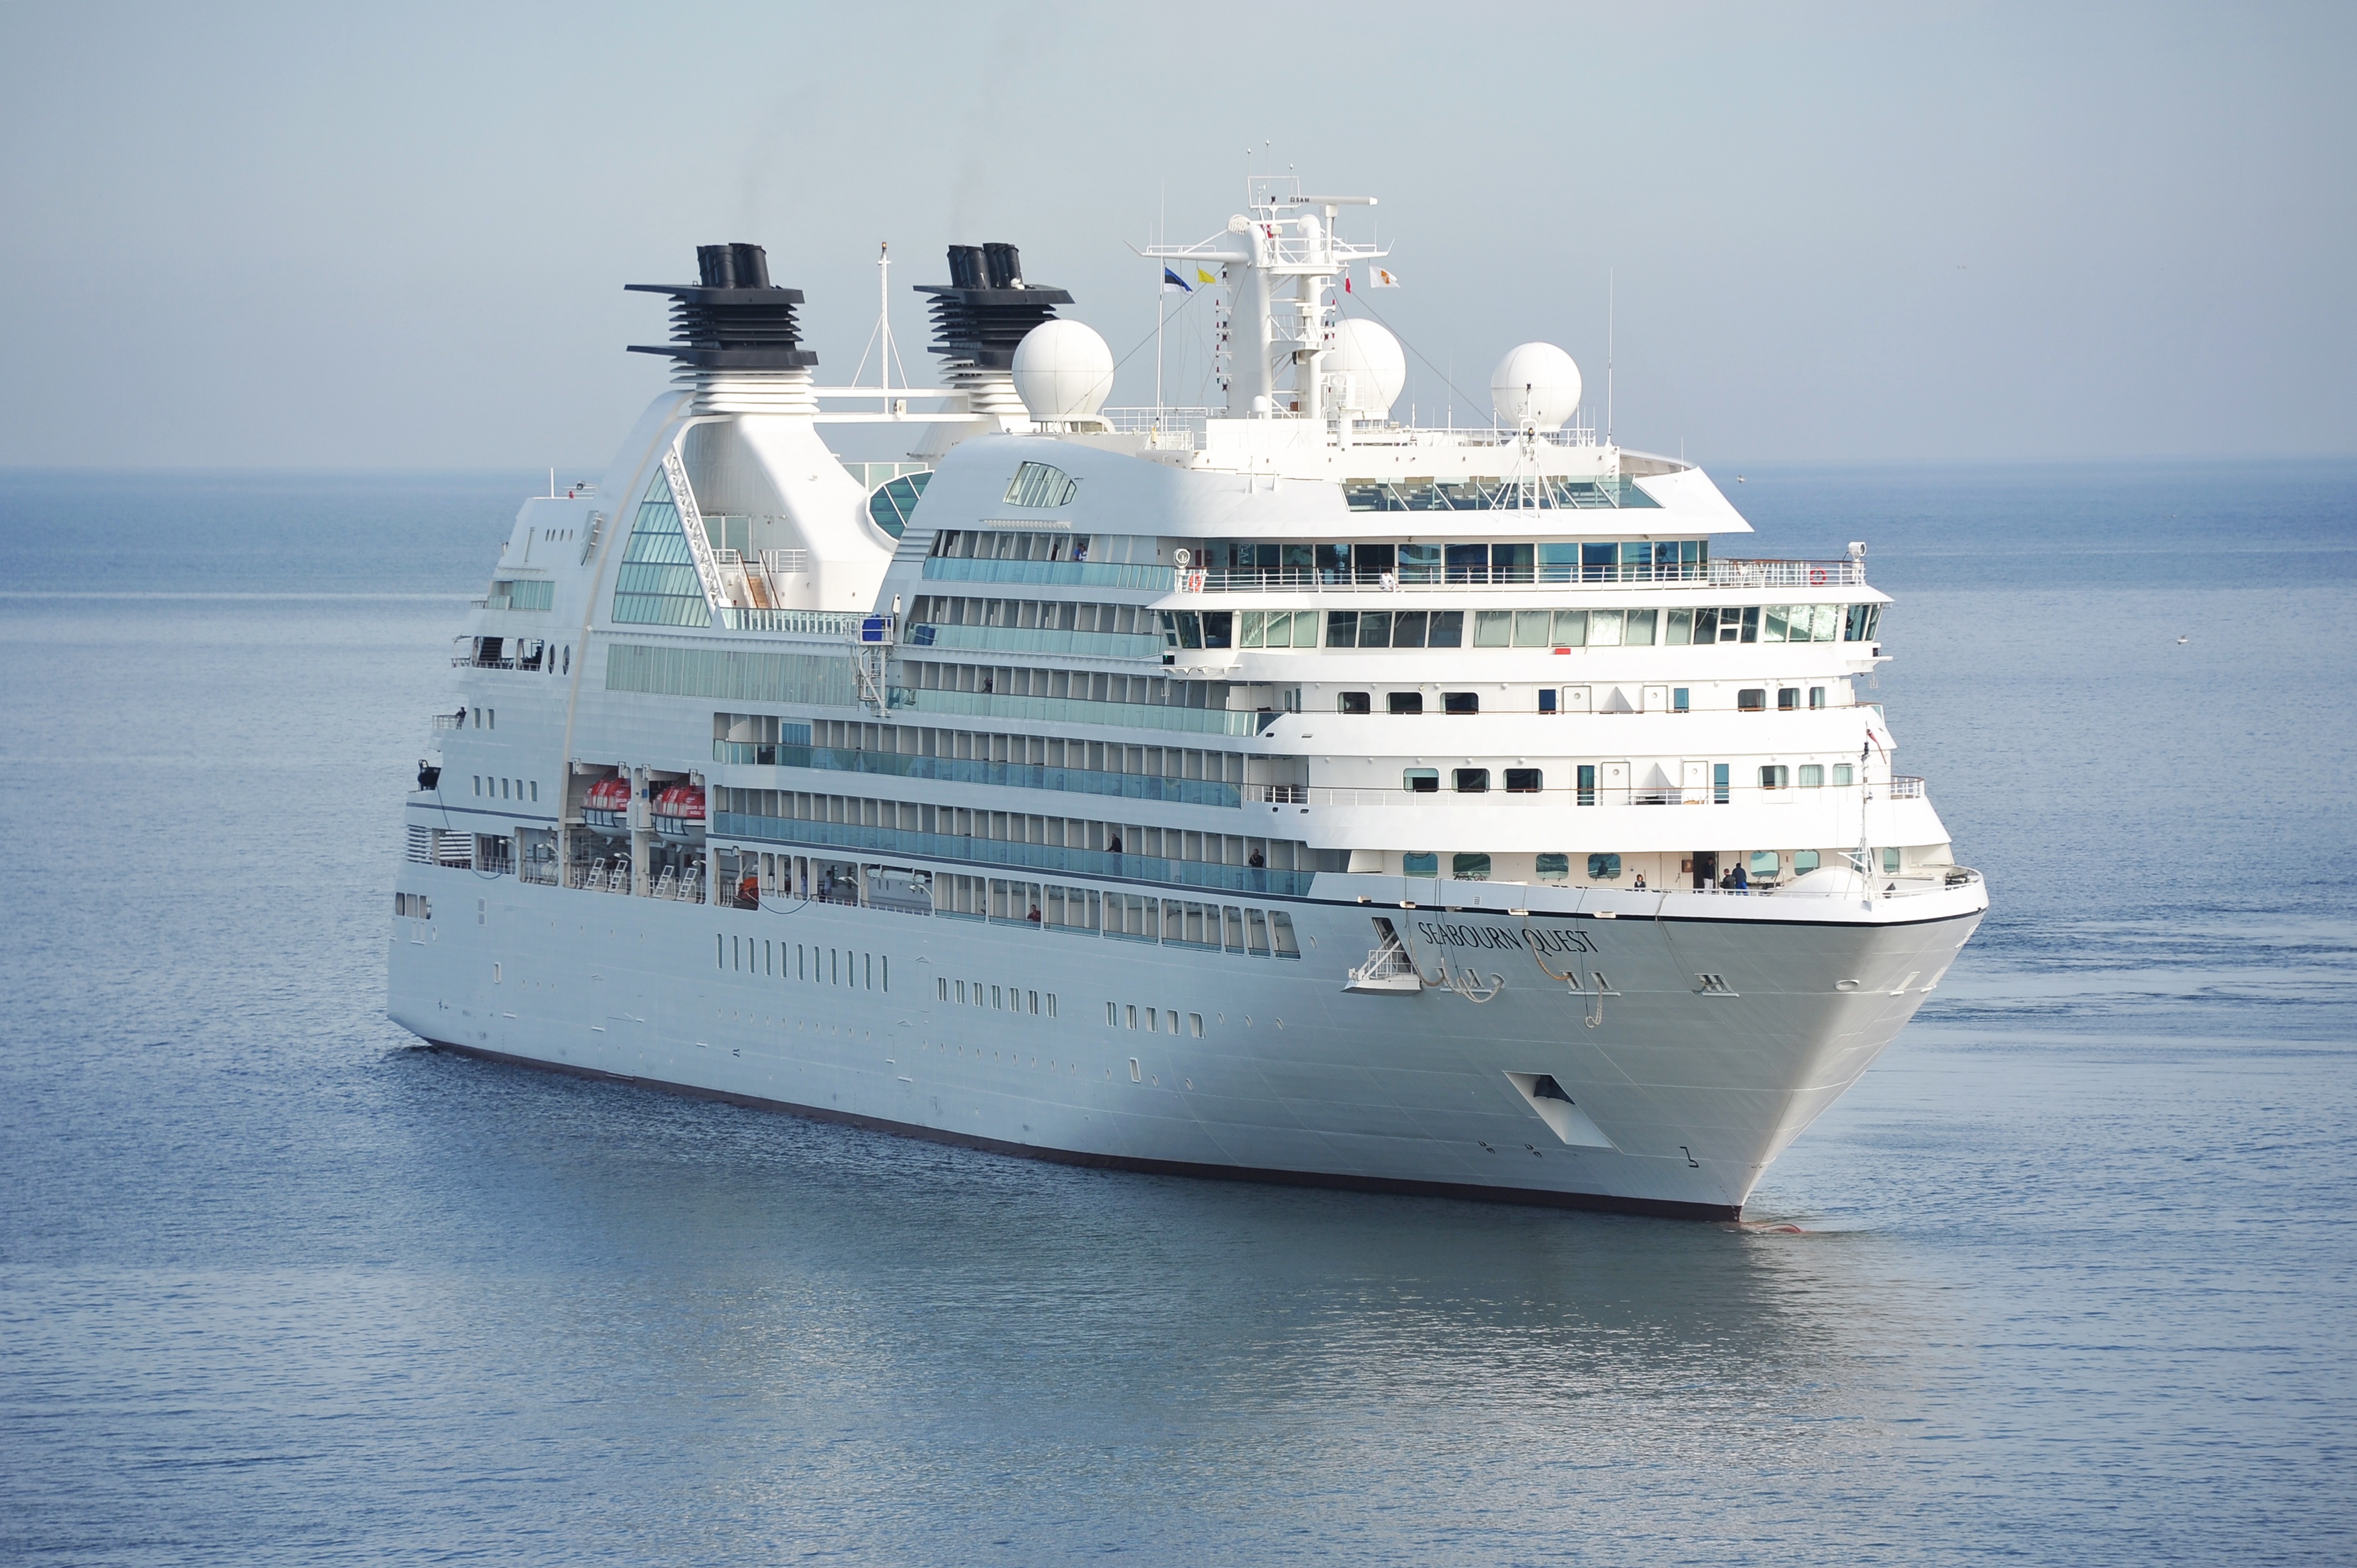 The MV Seabourn Quest on the Baltic Sea by susannp4